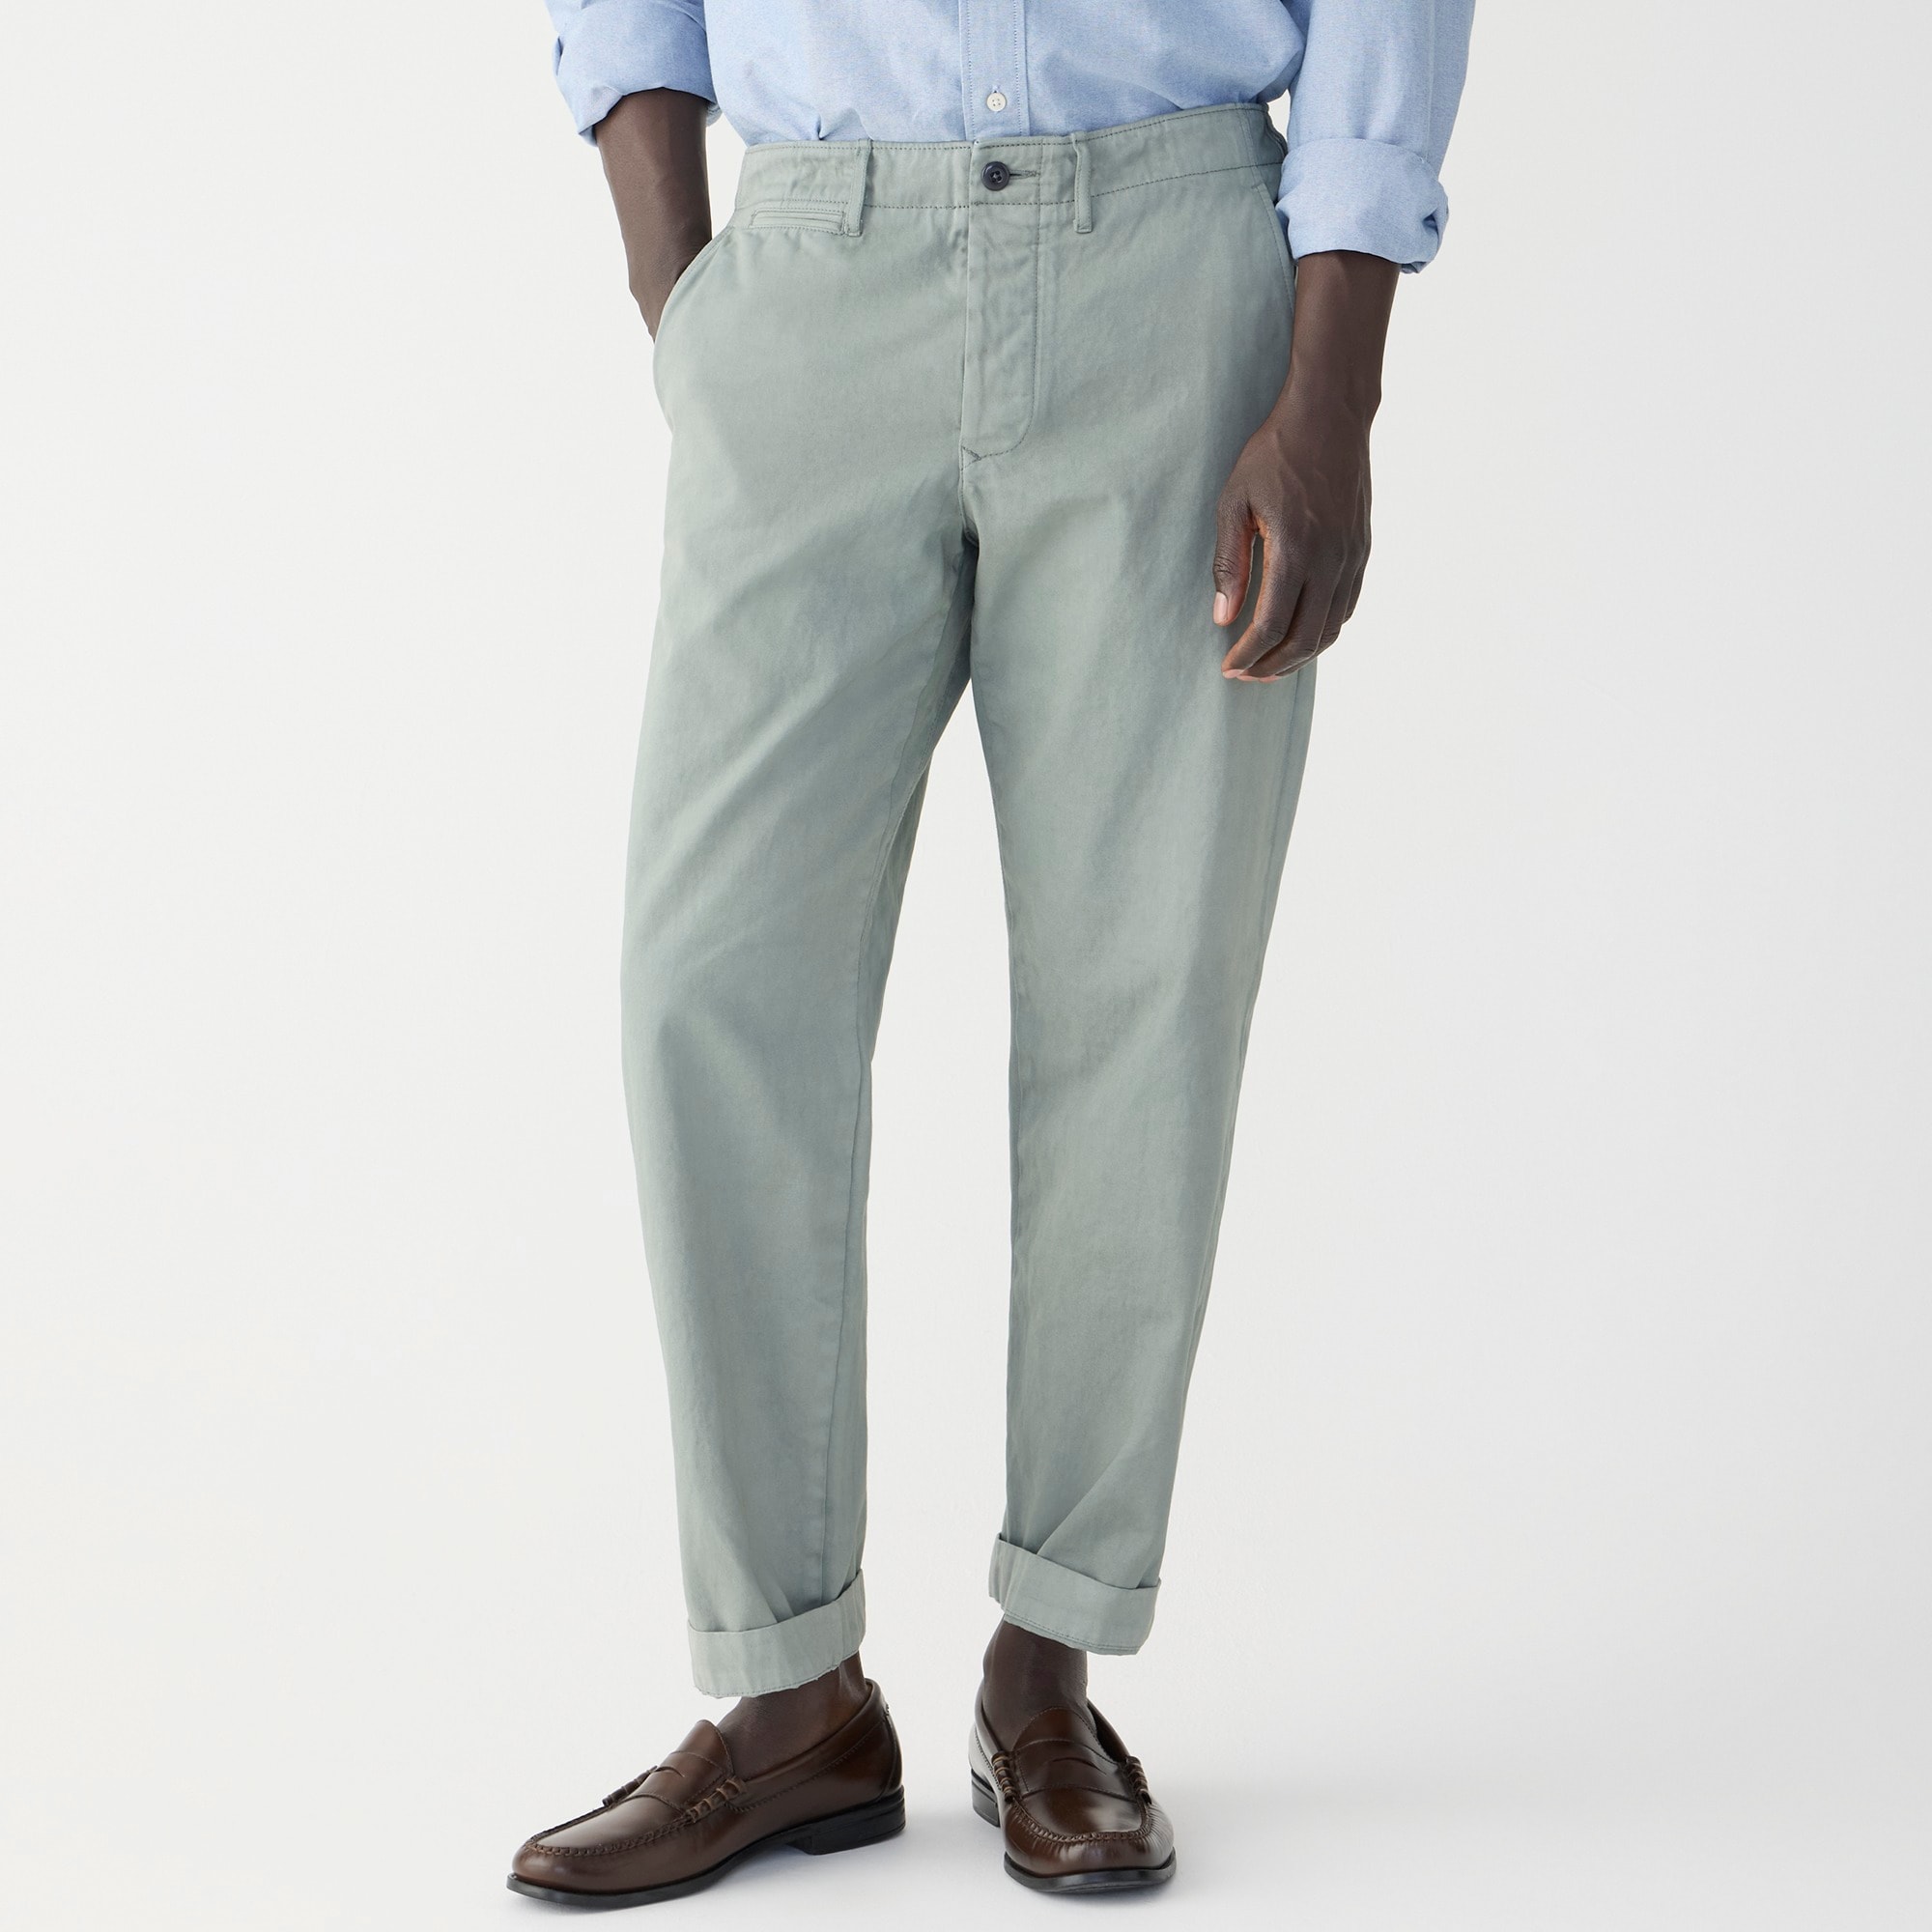 Jcrew Wallace u0026amp; Barnes selvedge officer chino pant